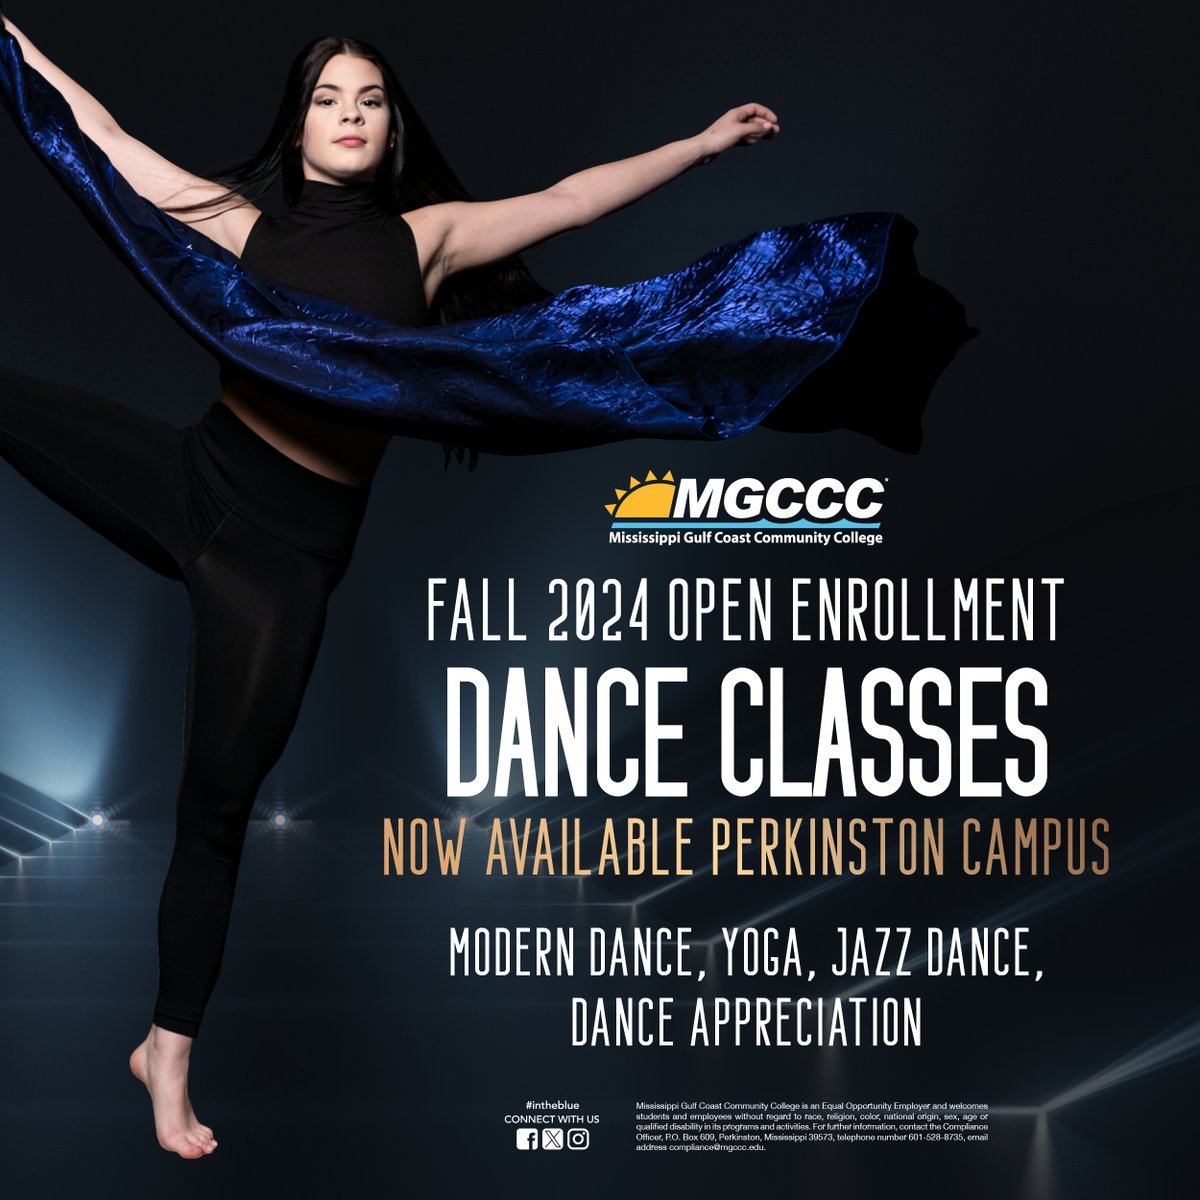 Are you passionate about dance? Enroll in our Fall 2024 Open Enrollment Dance courses! Explore the art of movement and rhythmic expression with our experienced instructors! For more information, contact Britney Patten at britney.patten@mgccc.edu or call 601-928-6979.